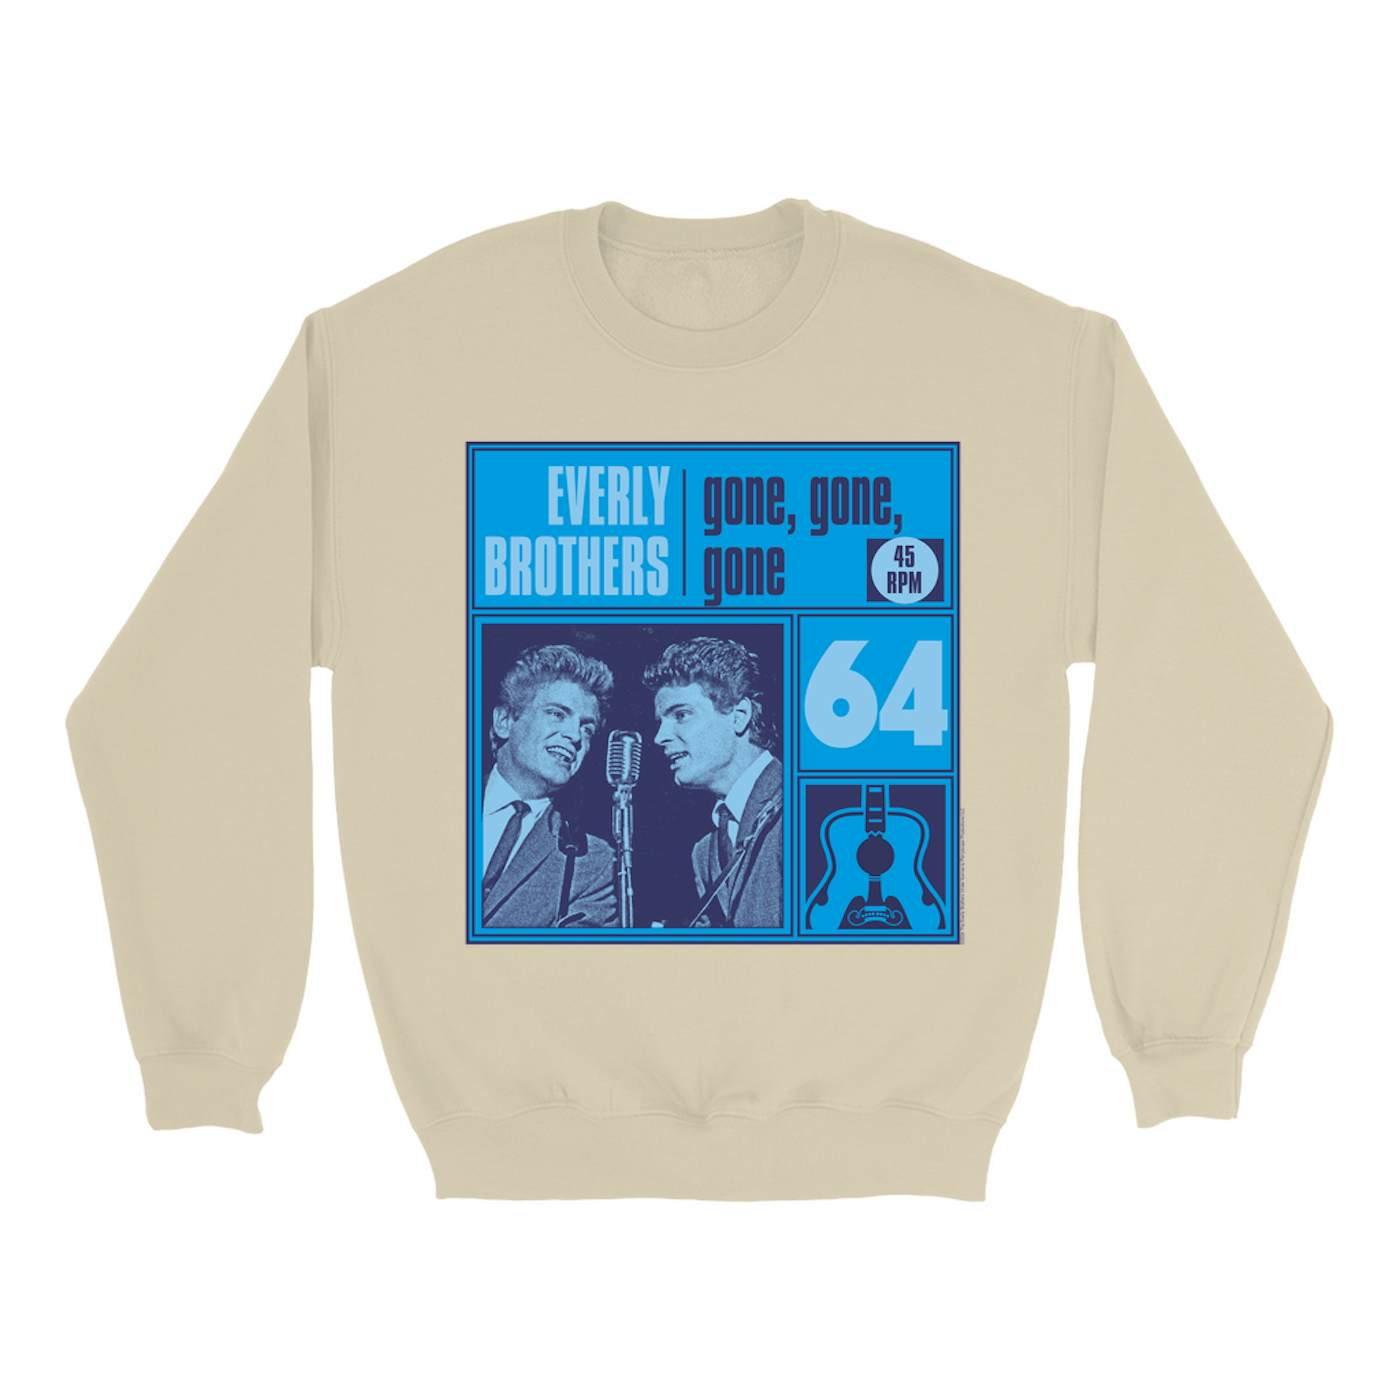 The Everly Brothers Sweatshirt | Gone, Gone, Gone Blue The Everly Brothers Sweatshirt